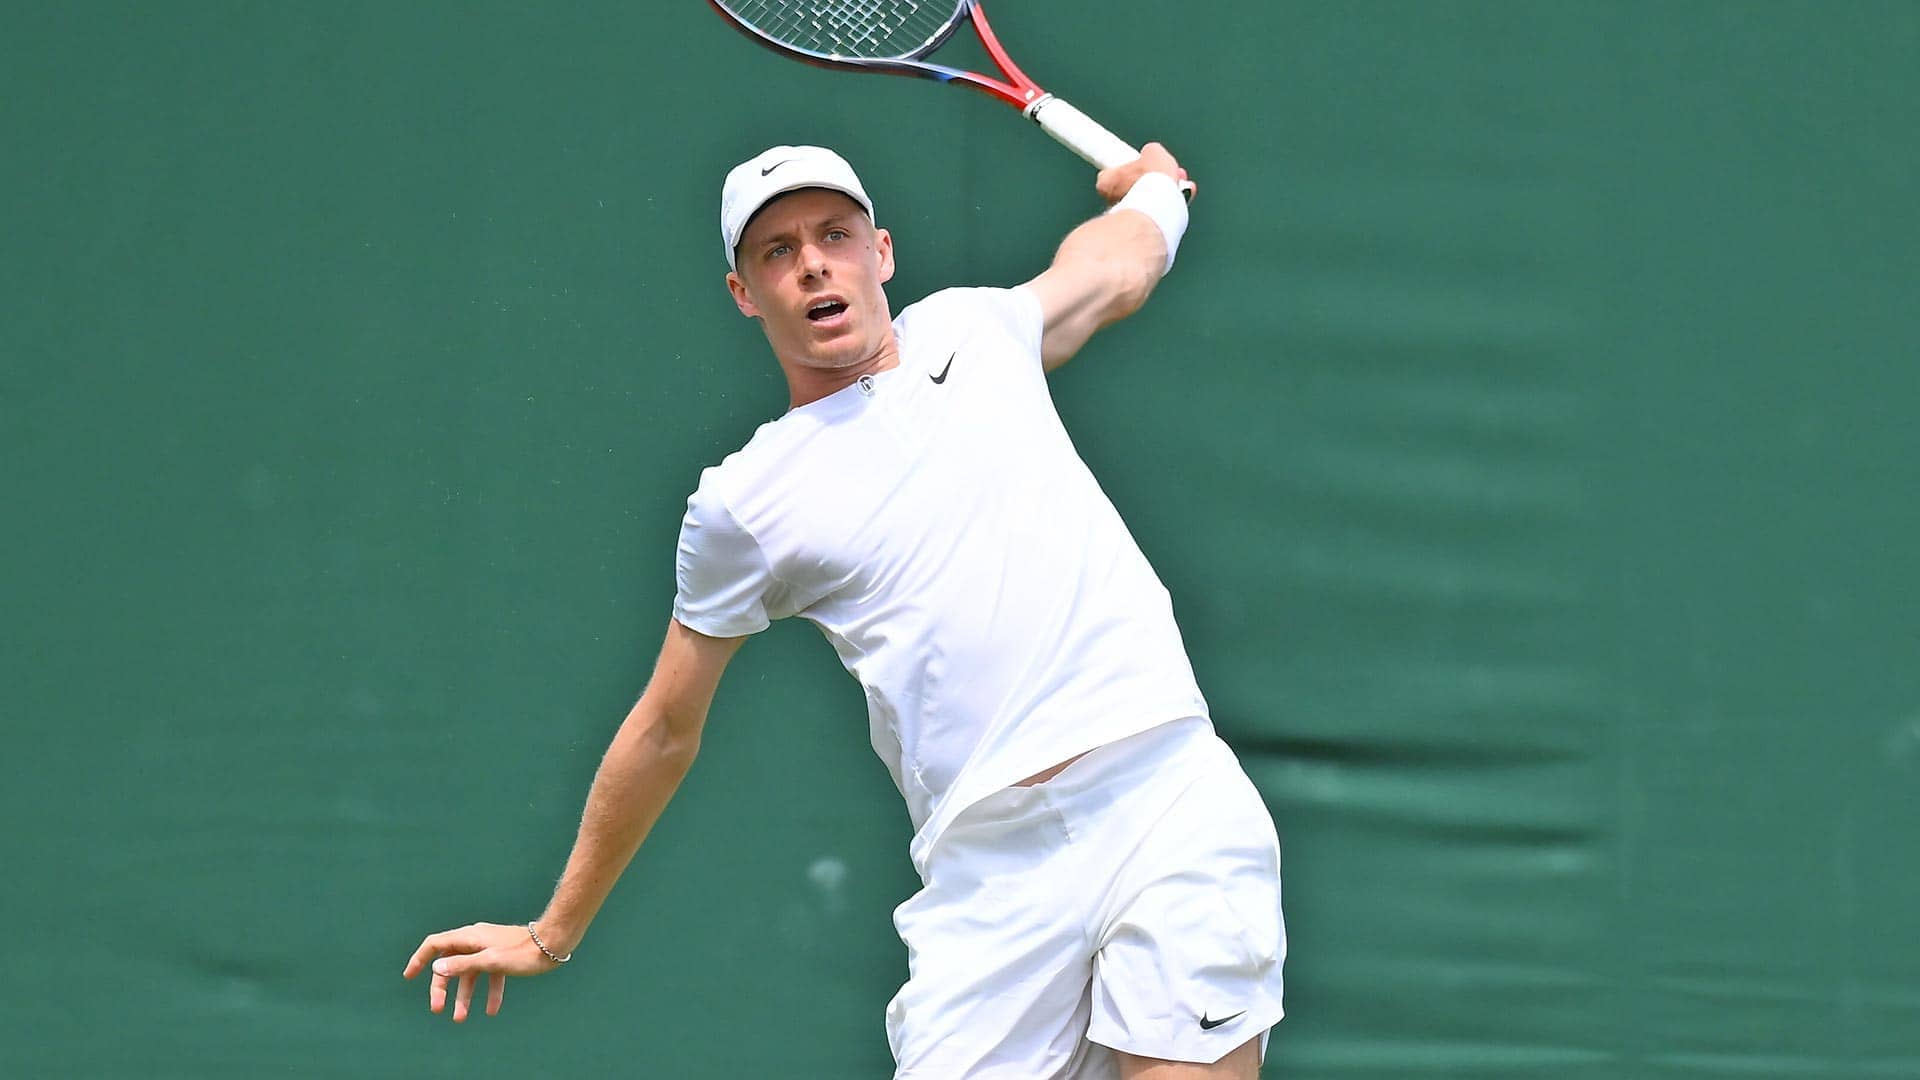 Denis Shapovalov last competed in July at Wimbledon.